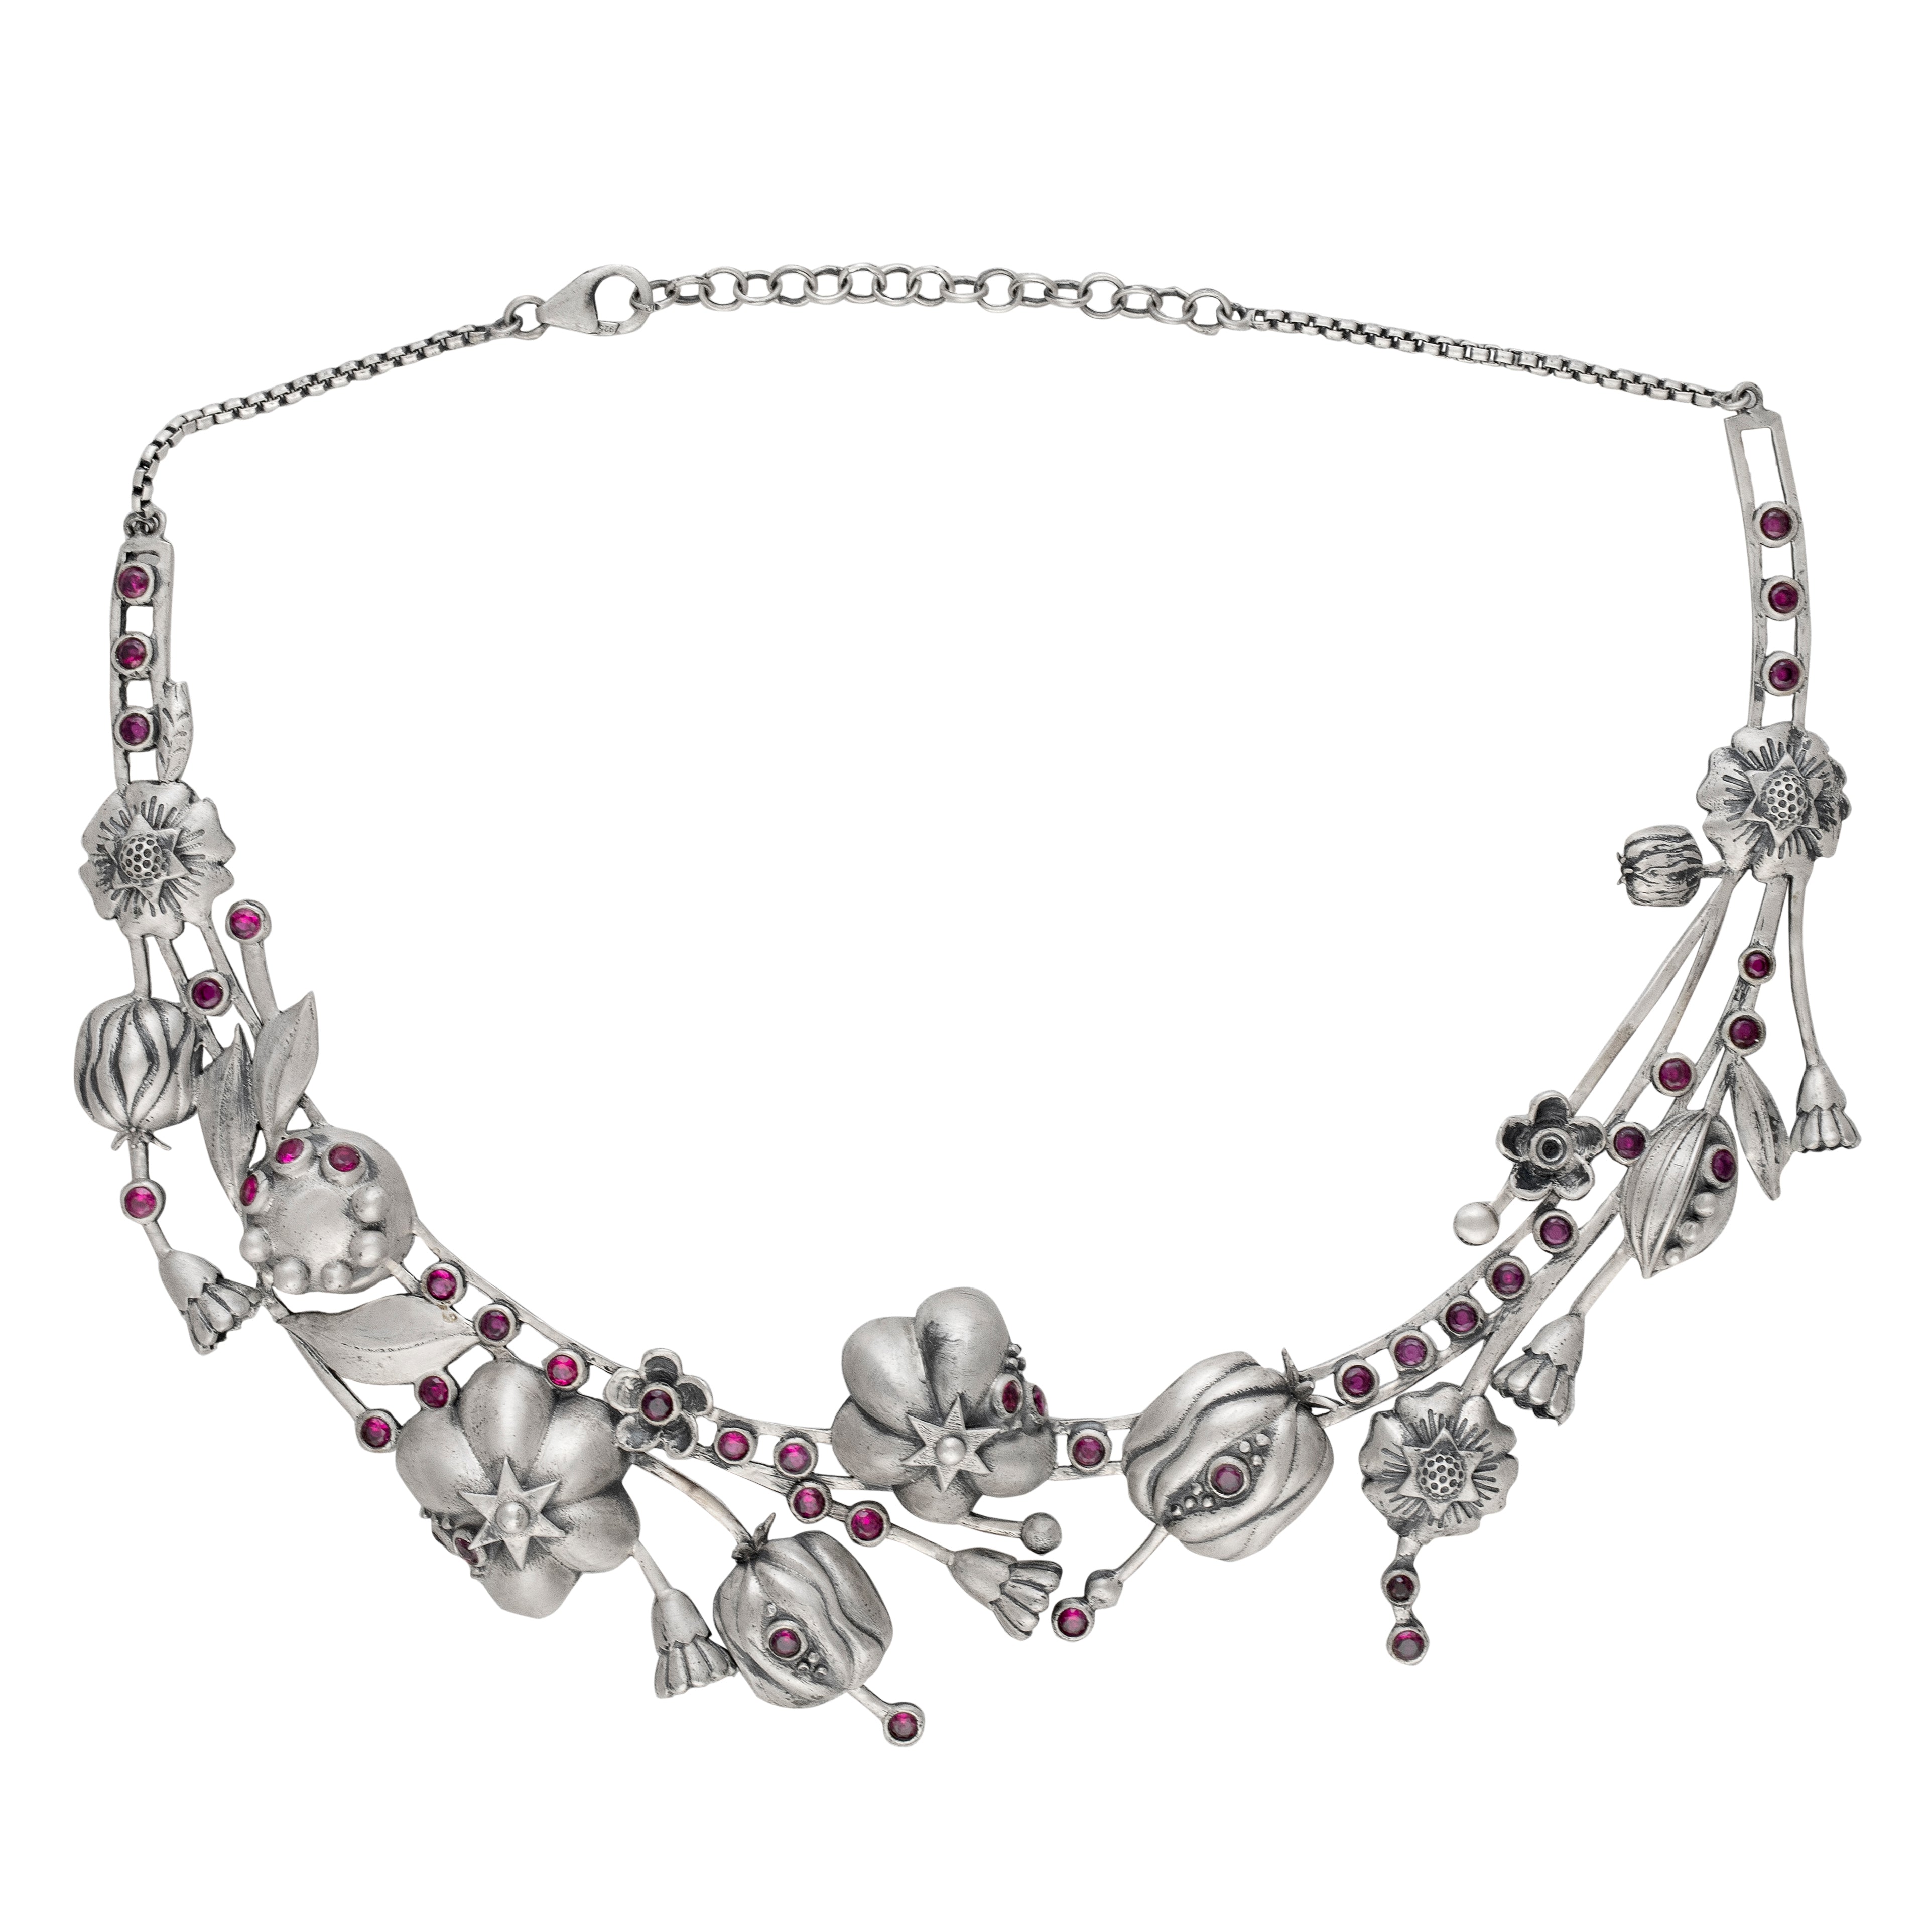 William Morris - Blossom Silver Necklace by Moha